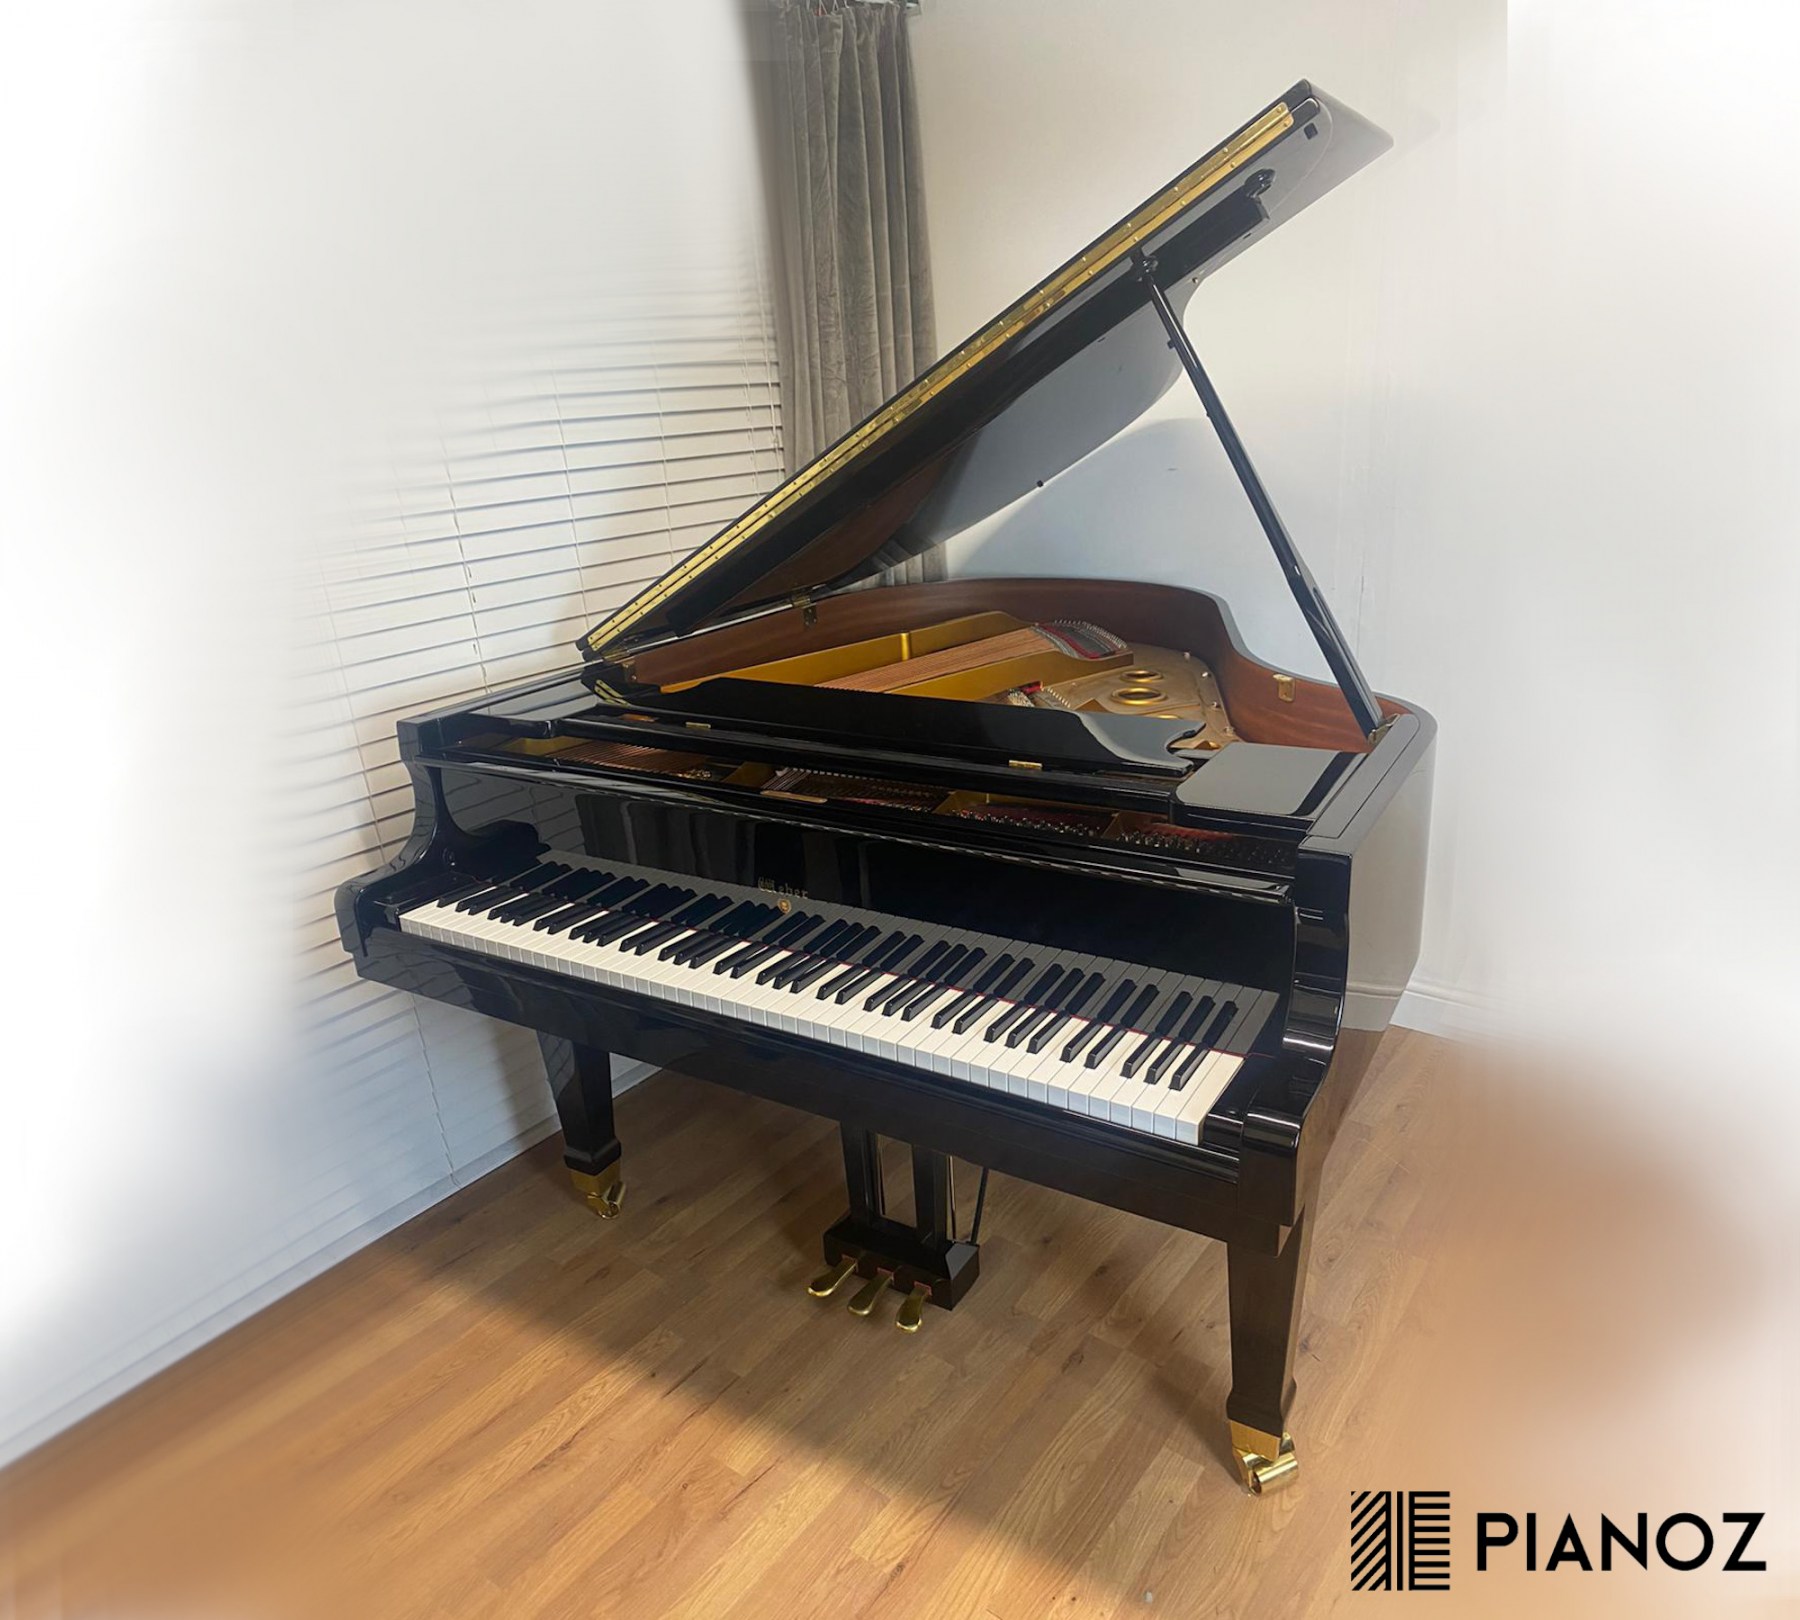 Weber WLG57 Grand Piano piano for sale in UK